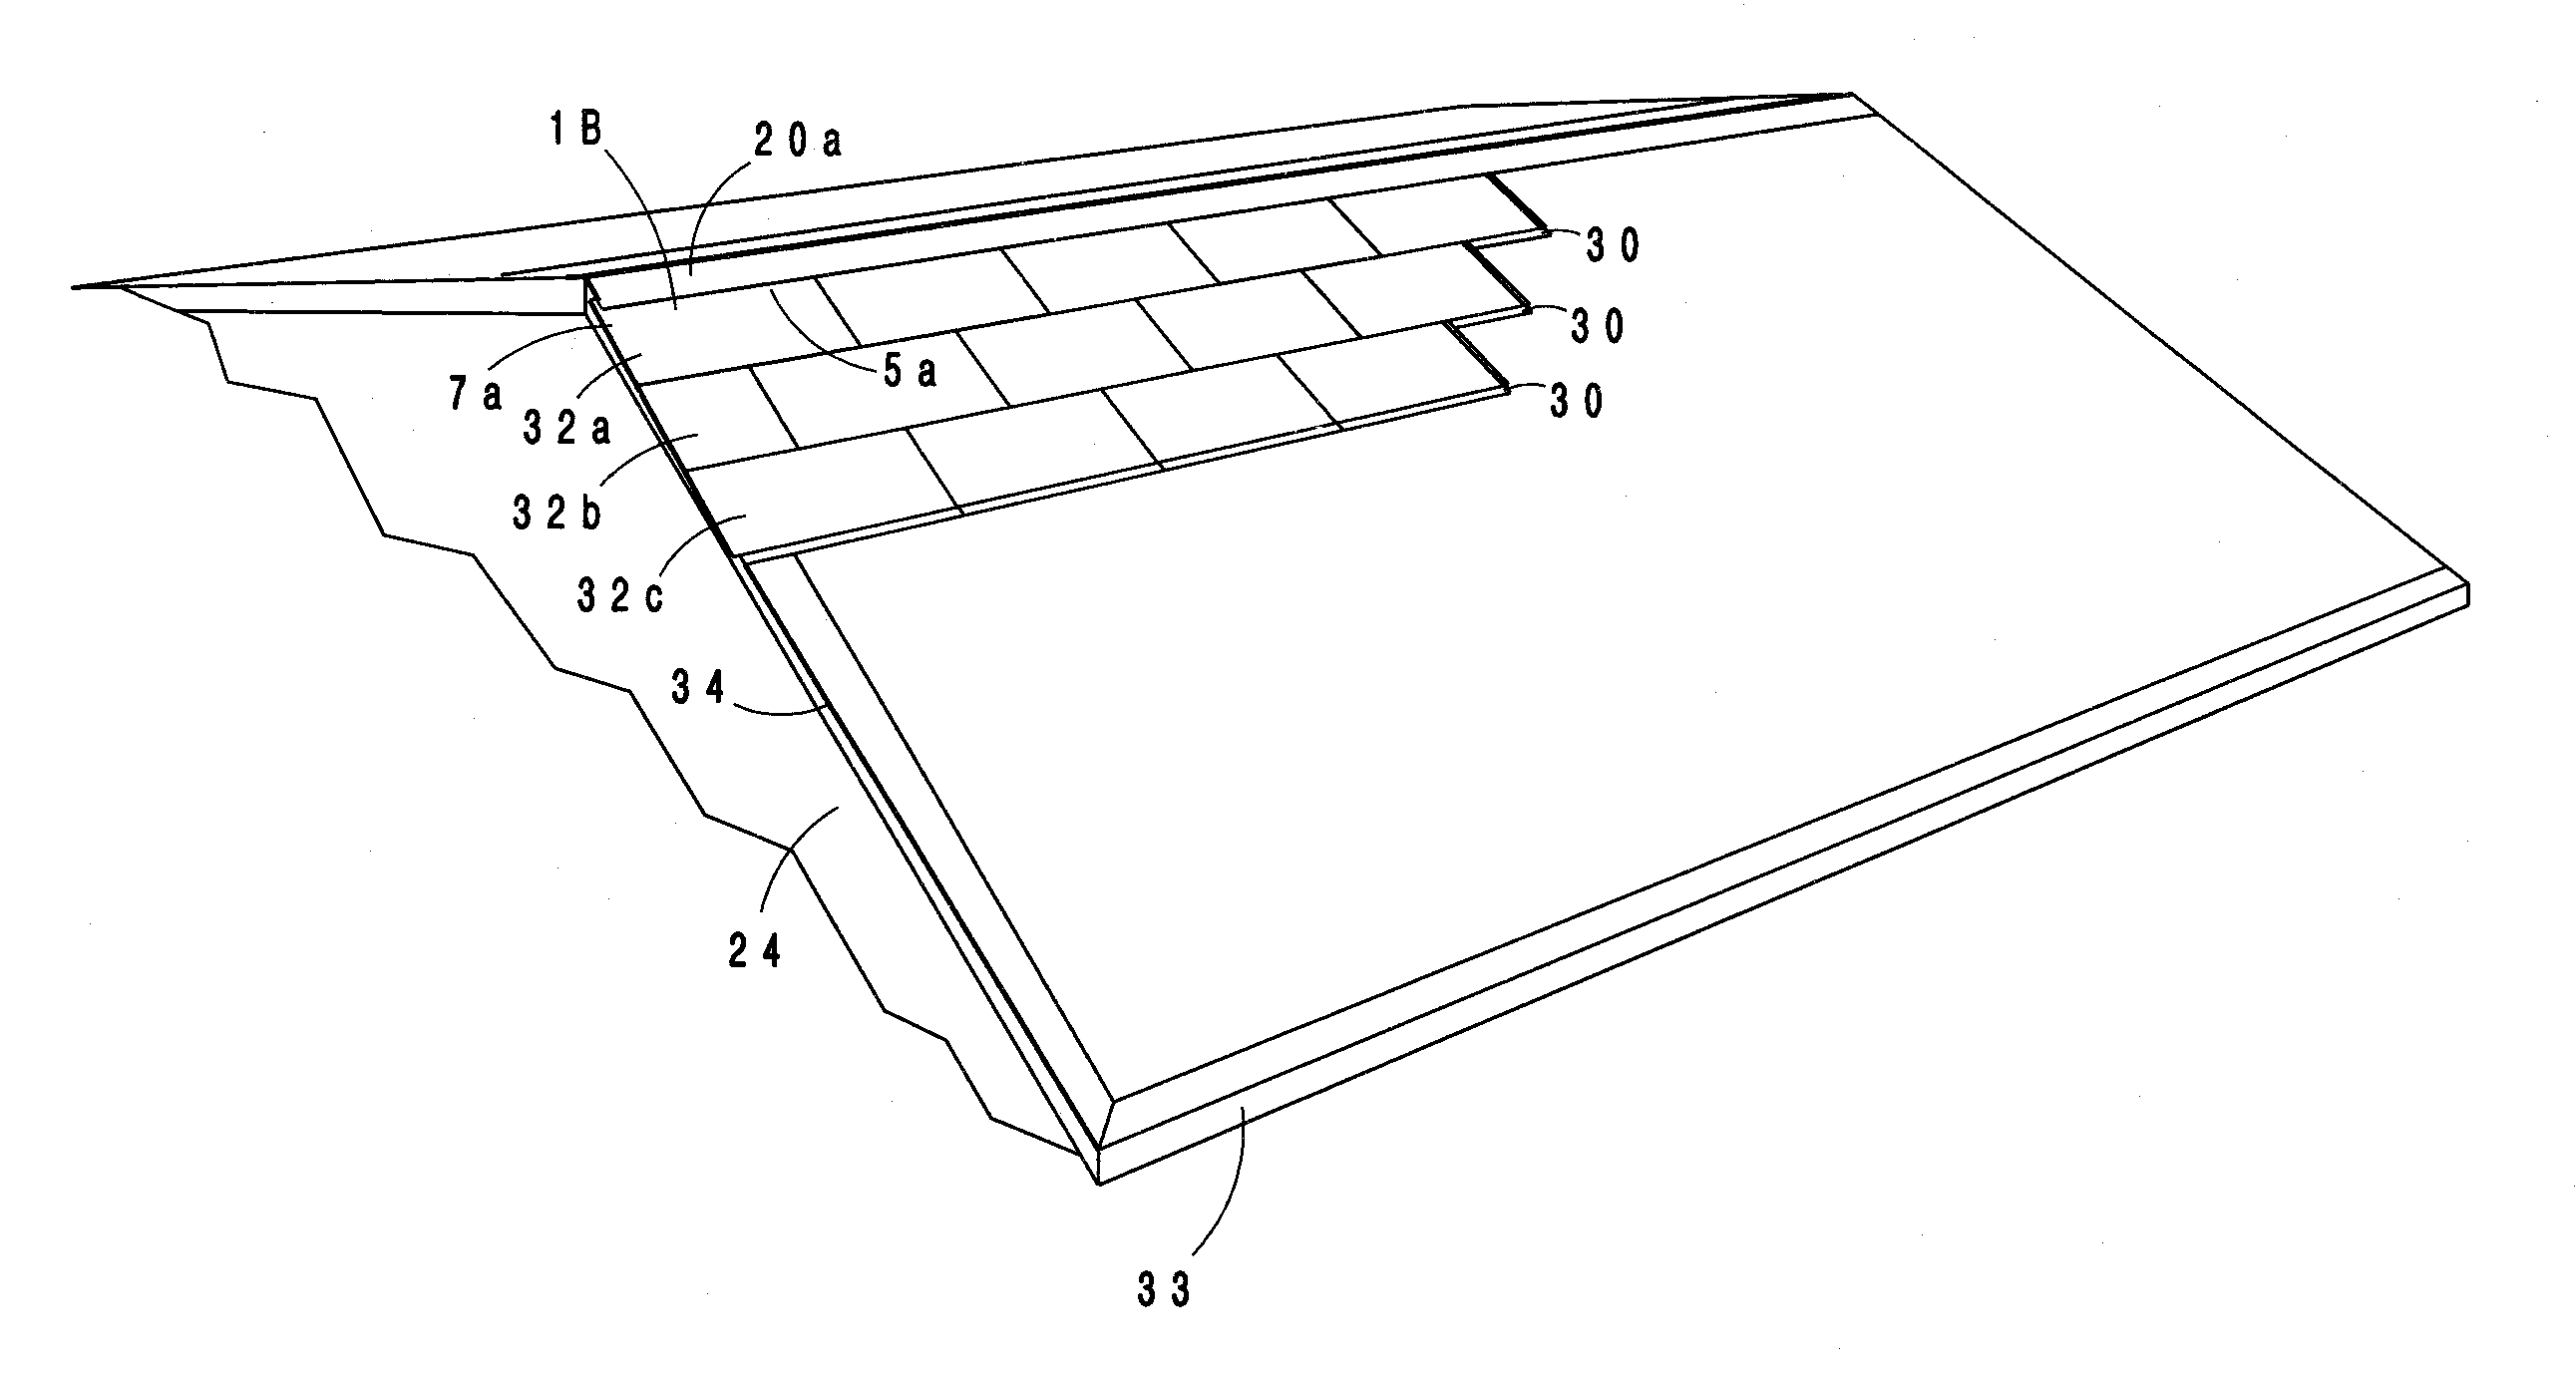 Metal roofing shingle, metal roofing shingle system, and method of installing